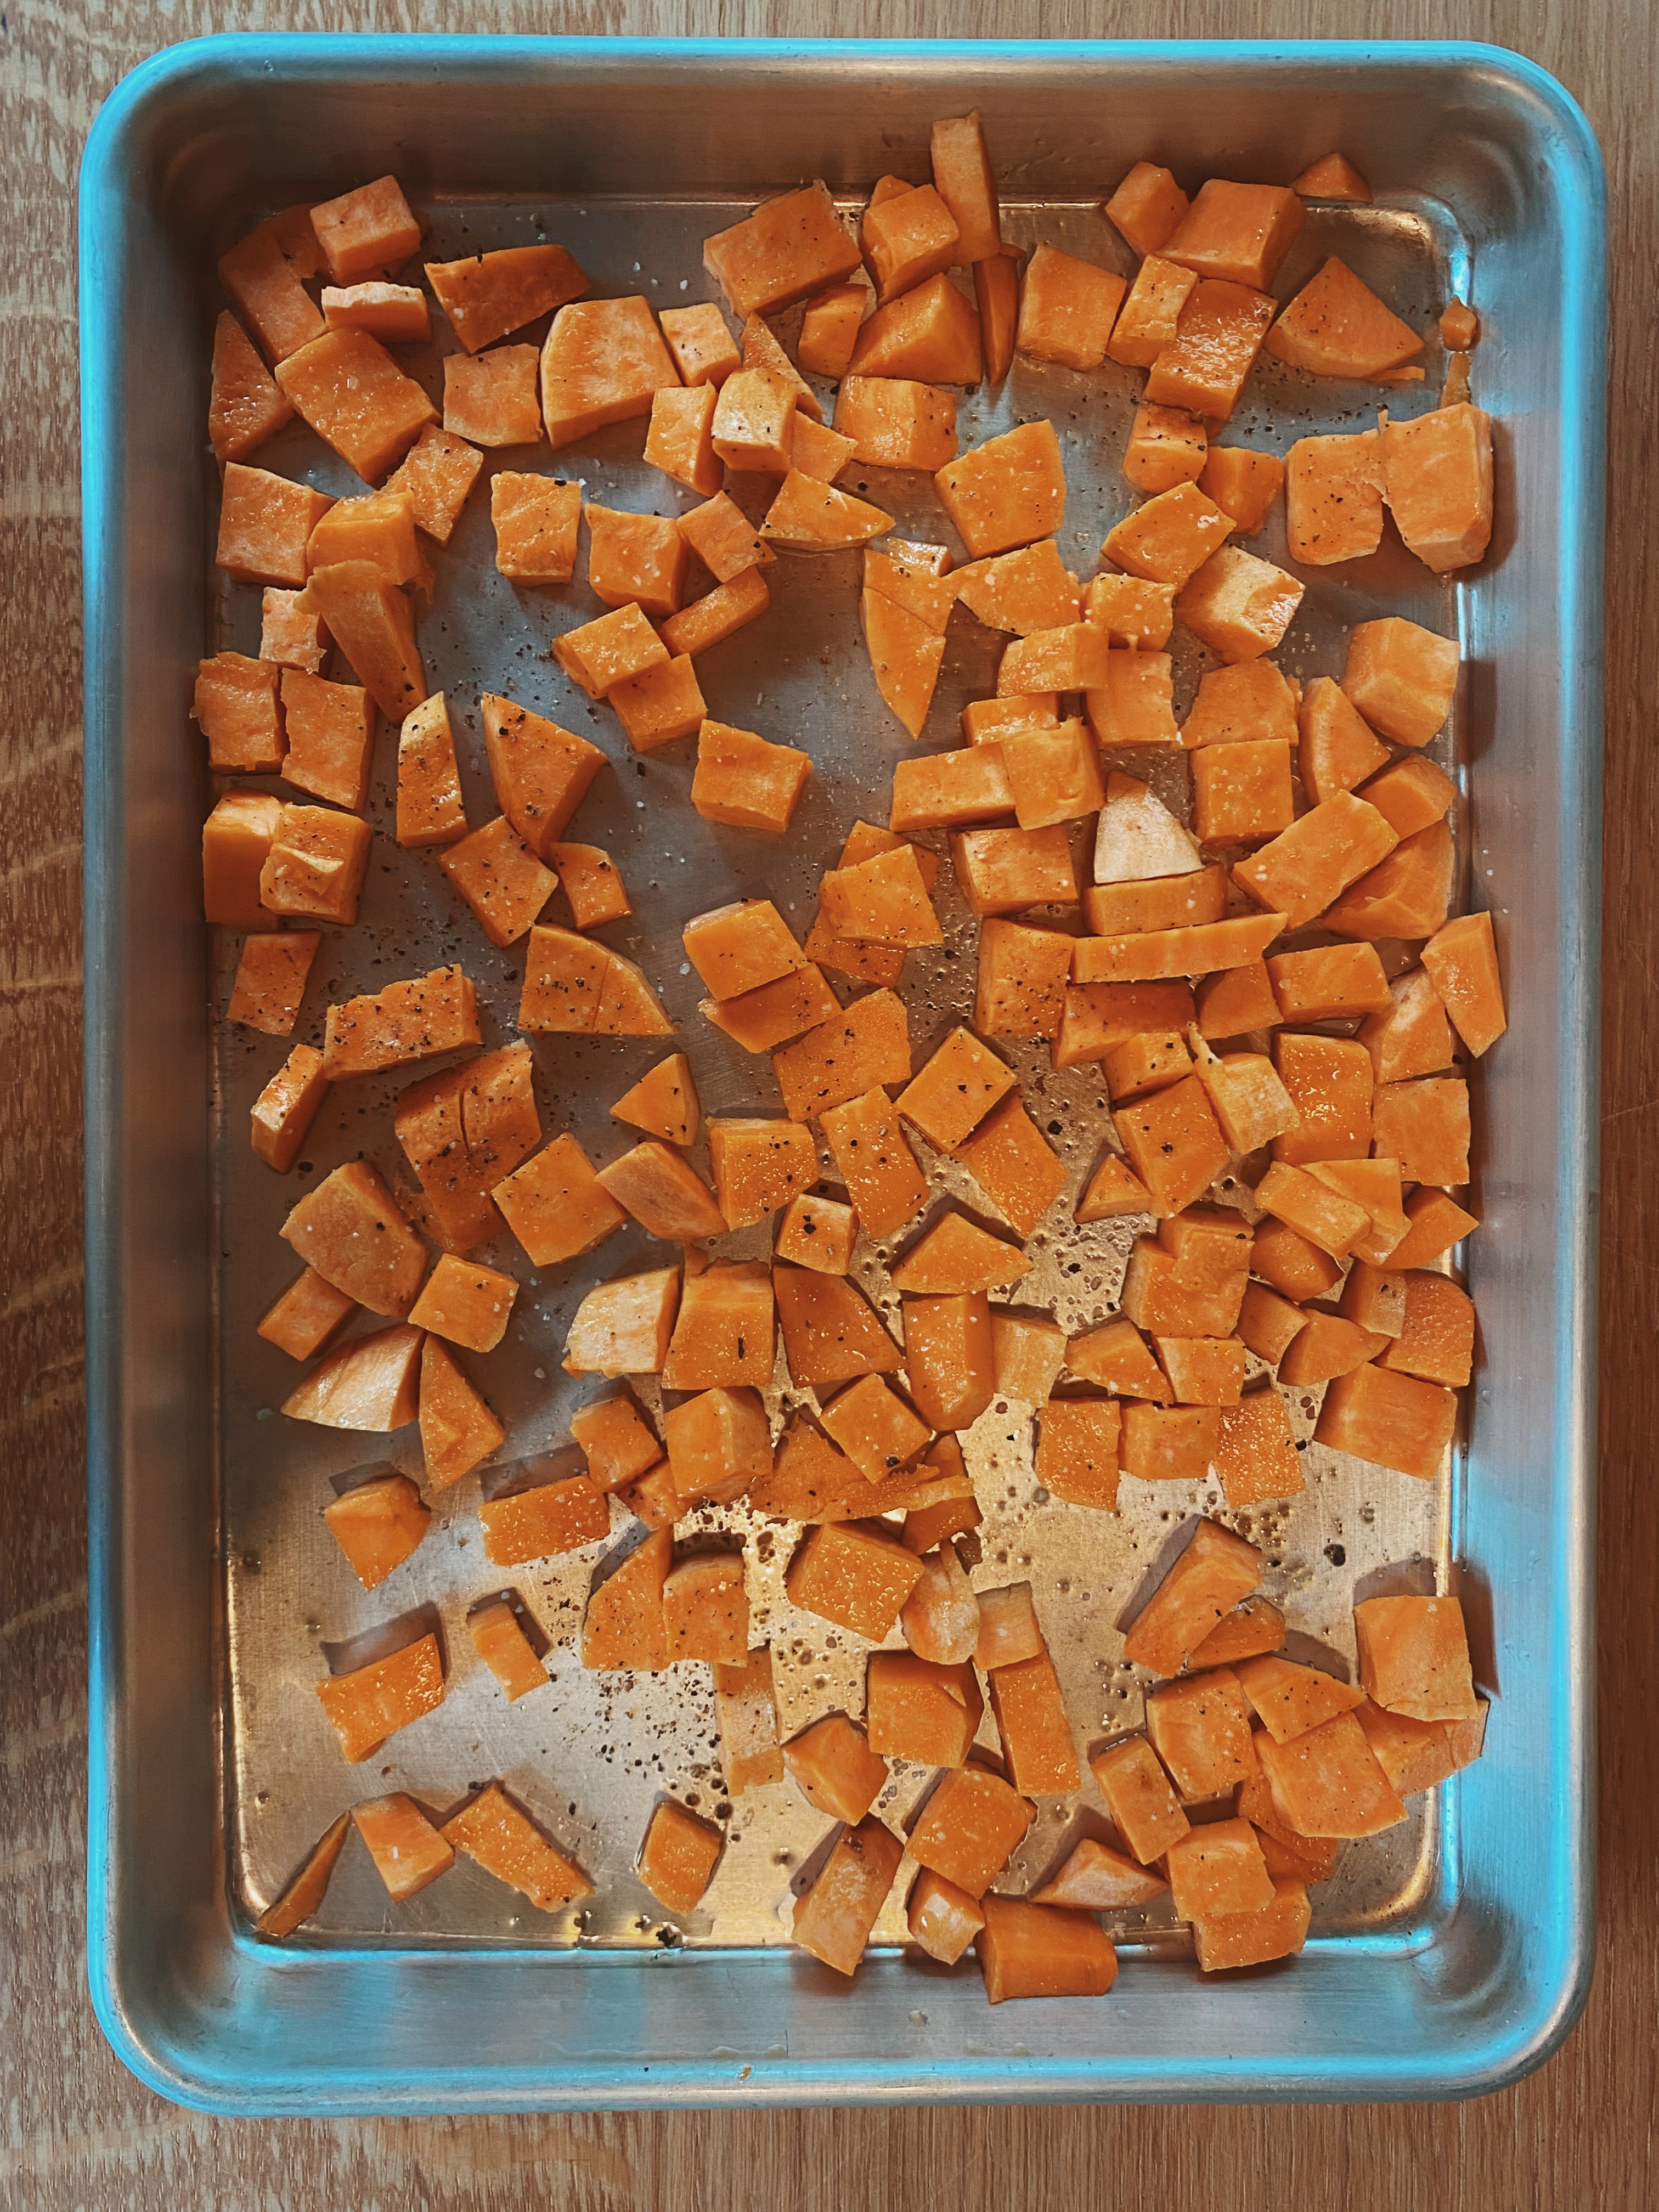 Chopped sweet potatoes into 1/4 inch size cubes.